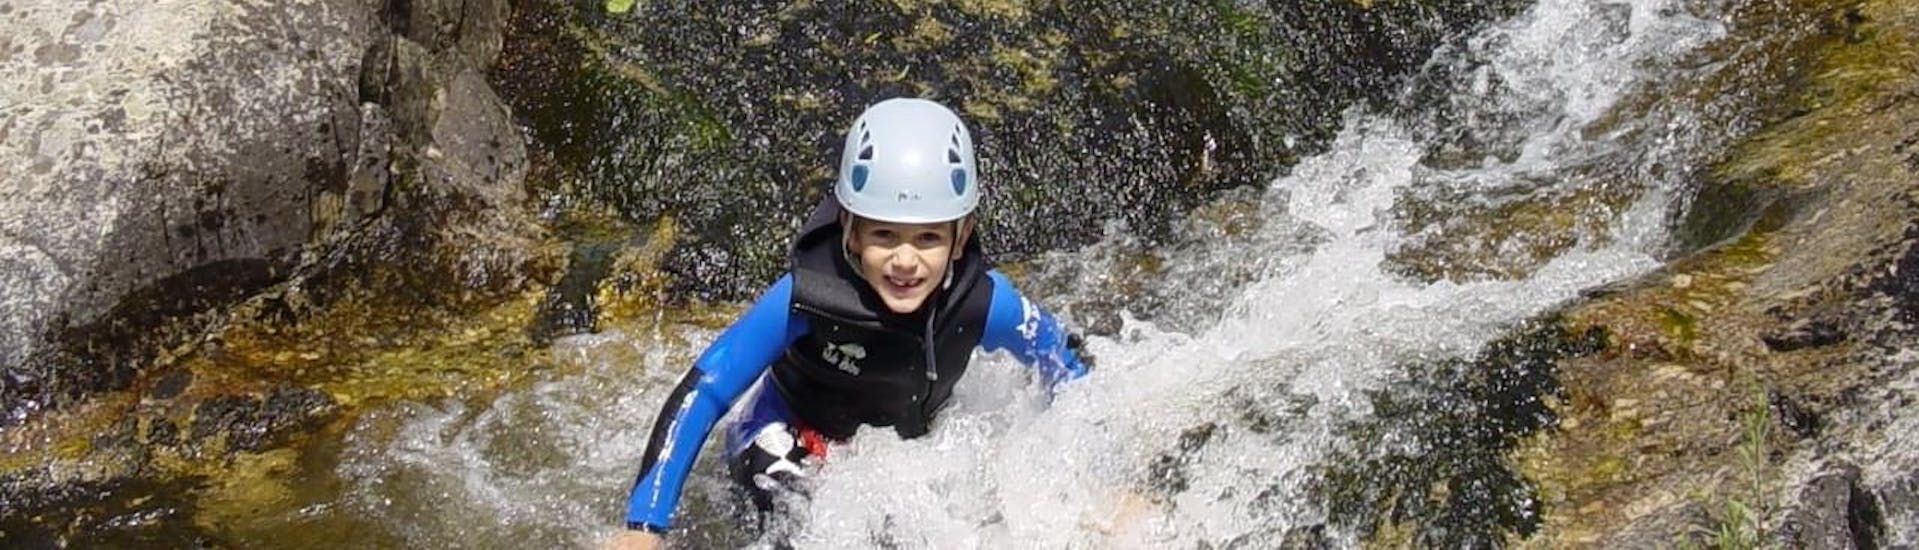 canyoning-in-the-bas-chassezac-canyon-for-families-cevenaventure-hero2